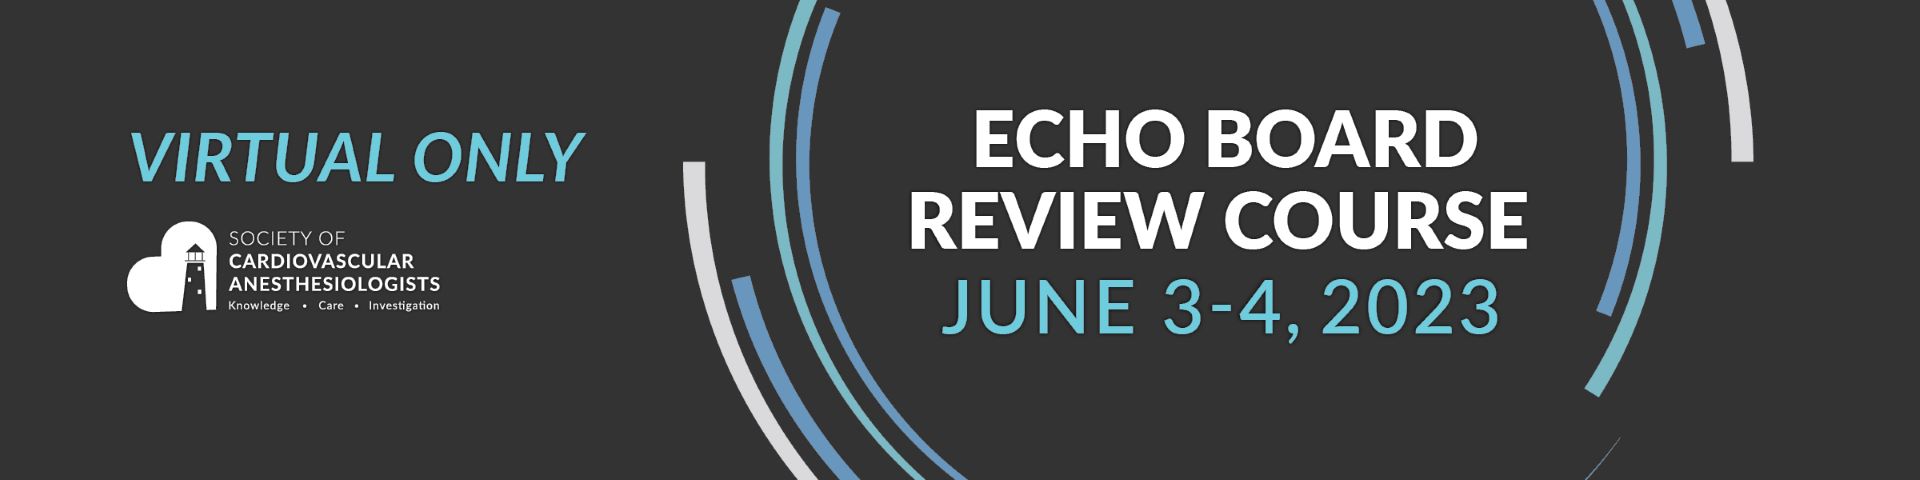 2023 Echo Board Review Course